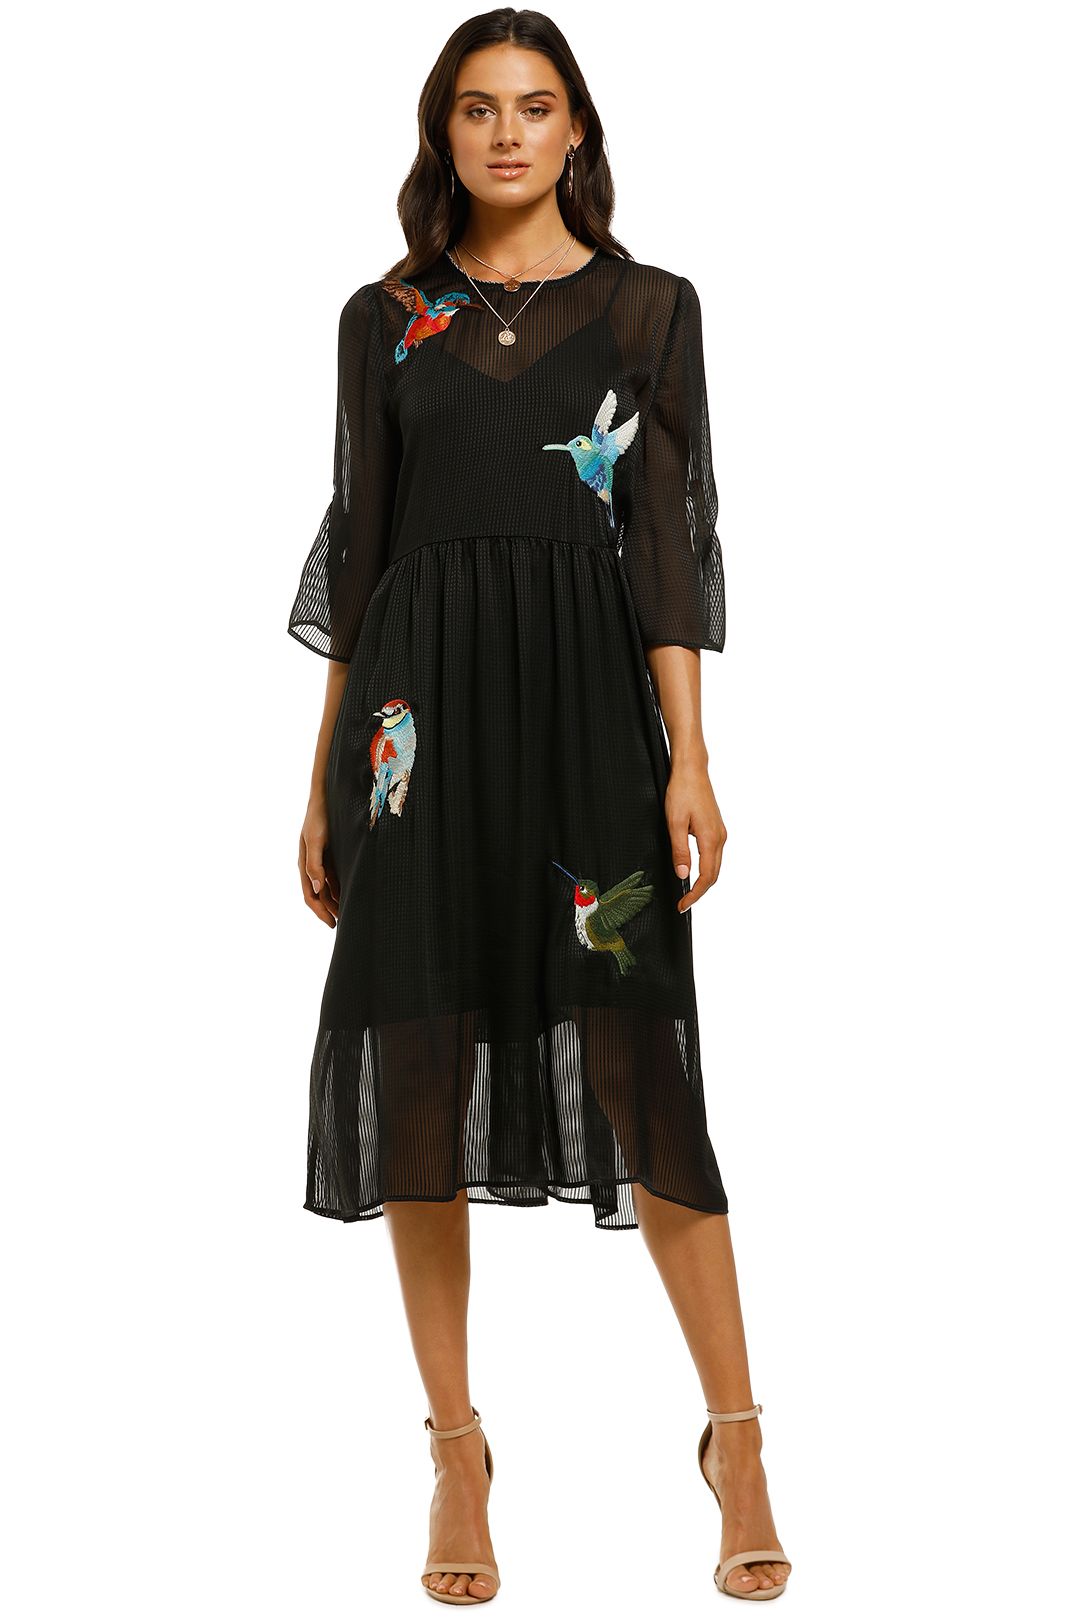 Curate-by-Trelise-Cooper-Sheer-Love-Dress-Black-Front